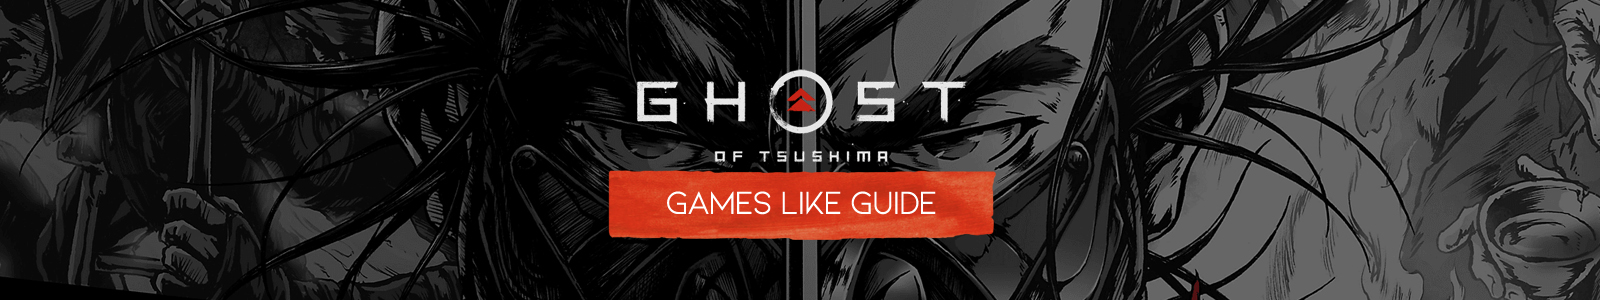 Ghost of Tsushima DIRECTOR’S CUT games like guide